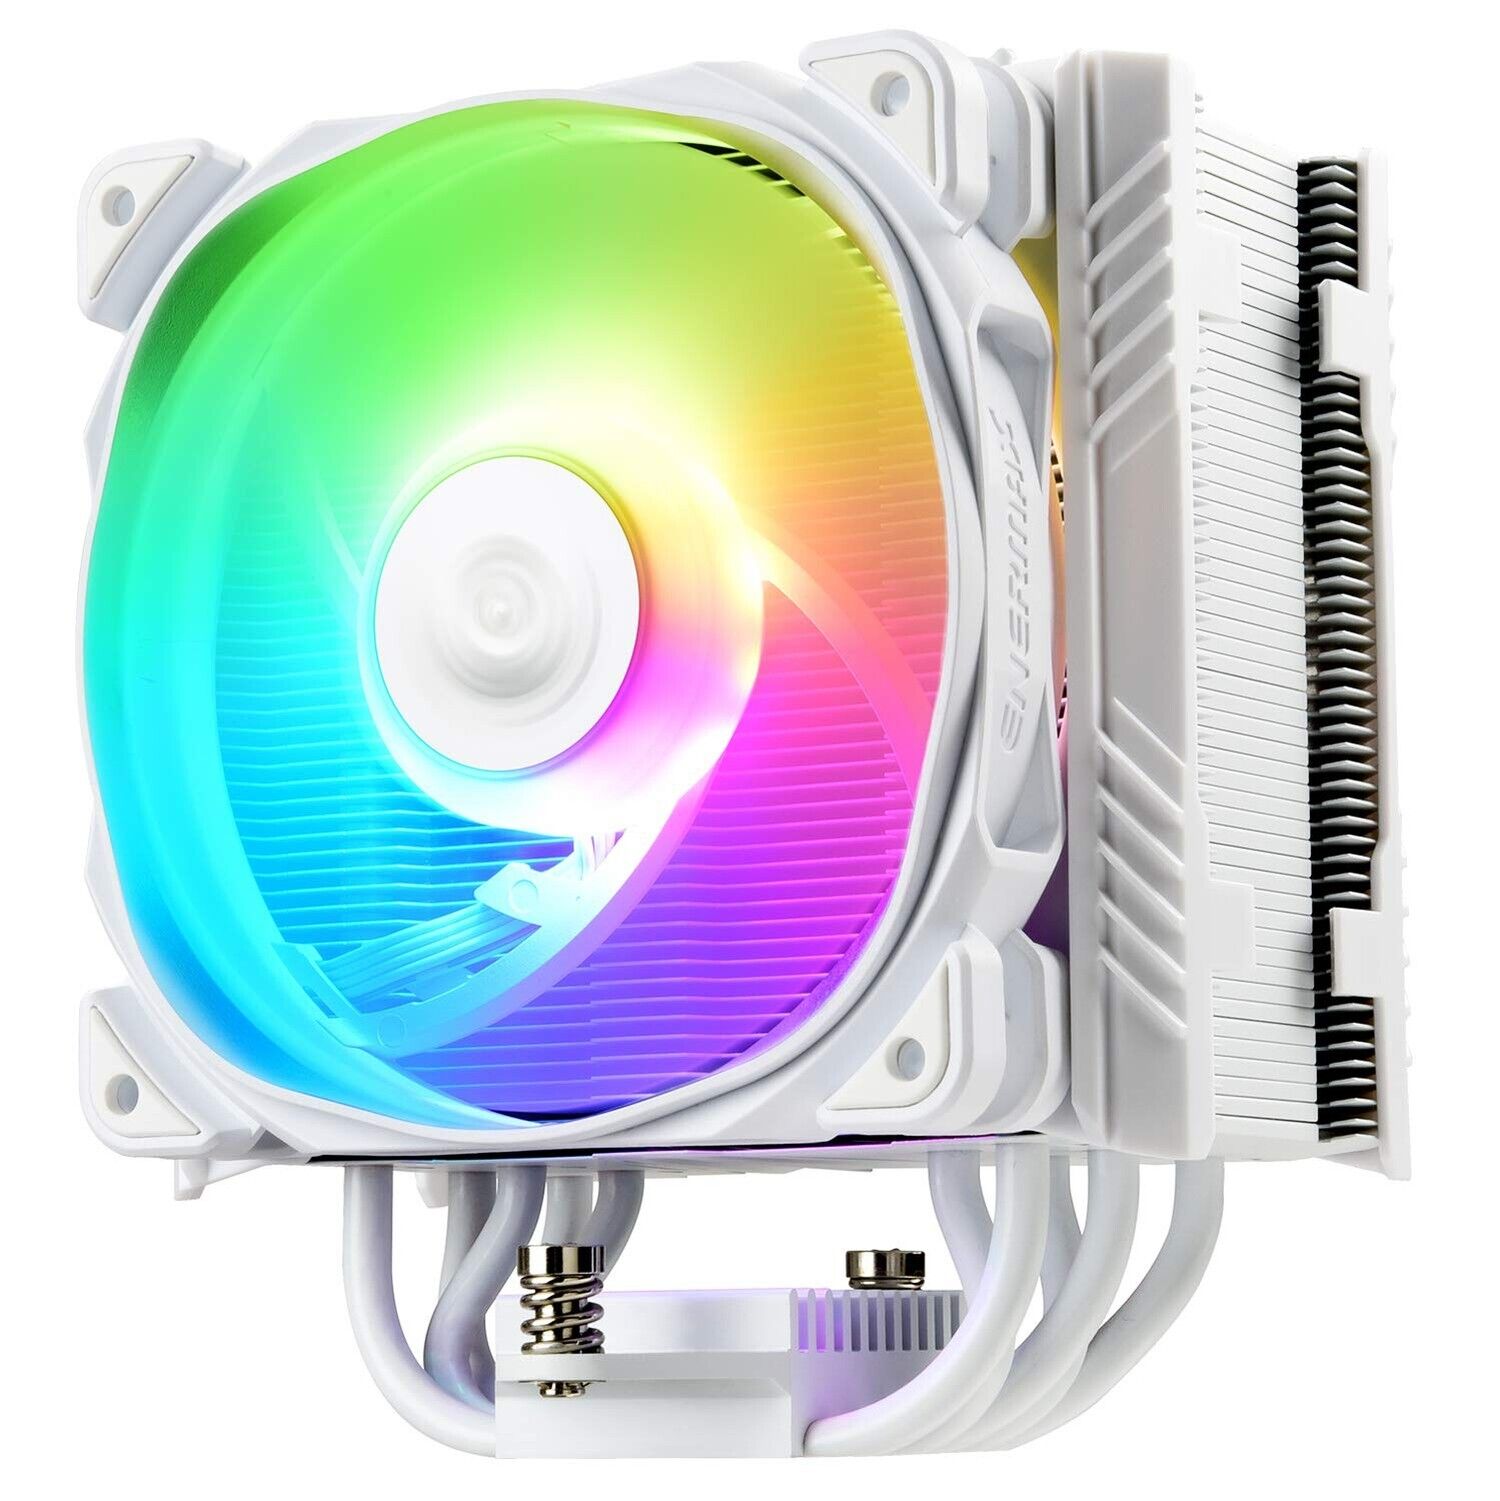 Enermax ETS-T50 Axe Addressable RGB CPU Air Cooler for AMD/Intel, 5 Direct-Co...